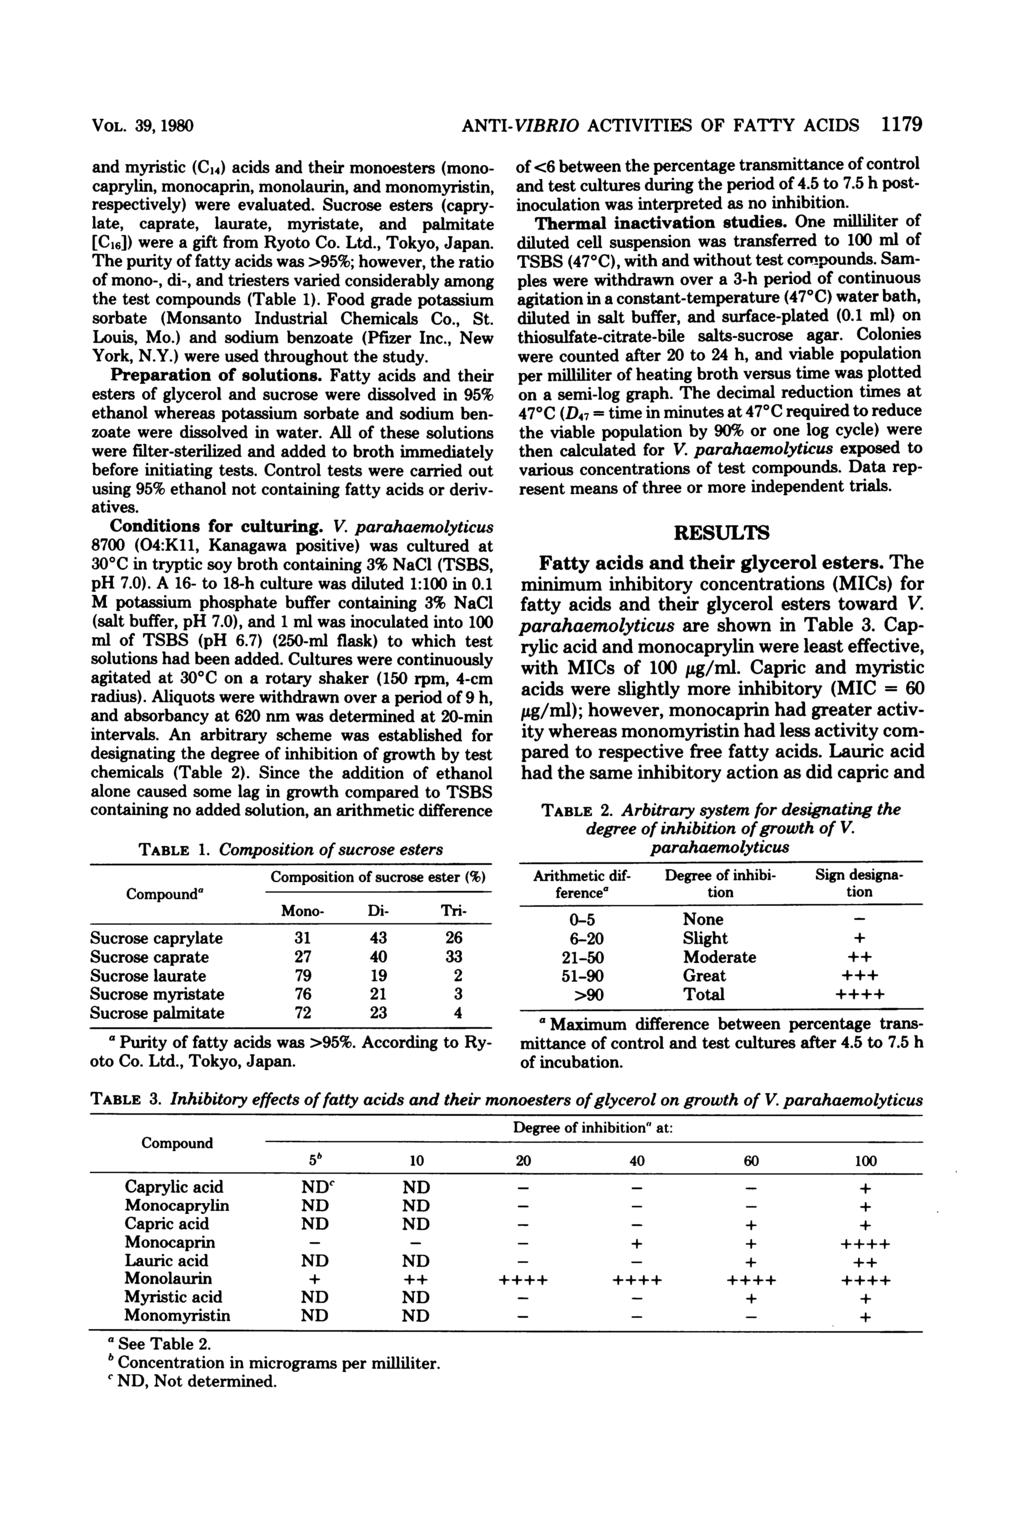 VOL. 39, 1980 and myristic (C14) acids and their monoesters (monocaprylin, monocaprin, monolaurin, and monomyristin, respectively) were evaluated.